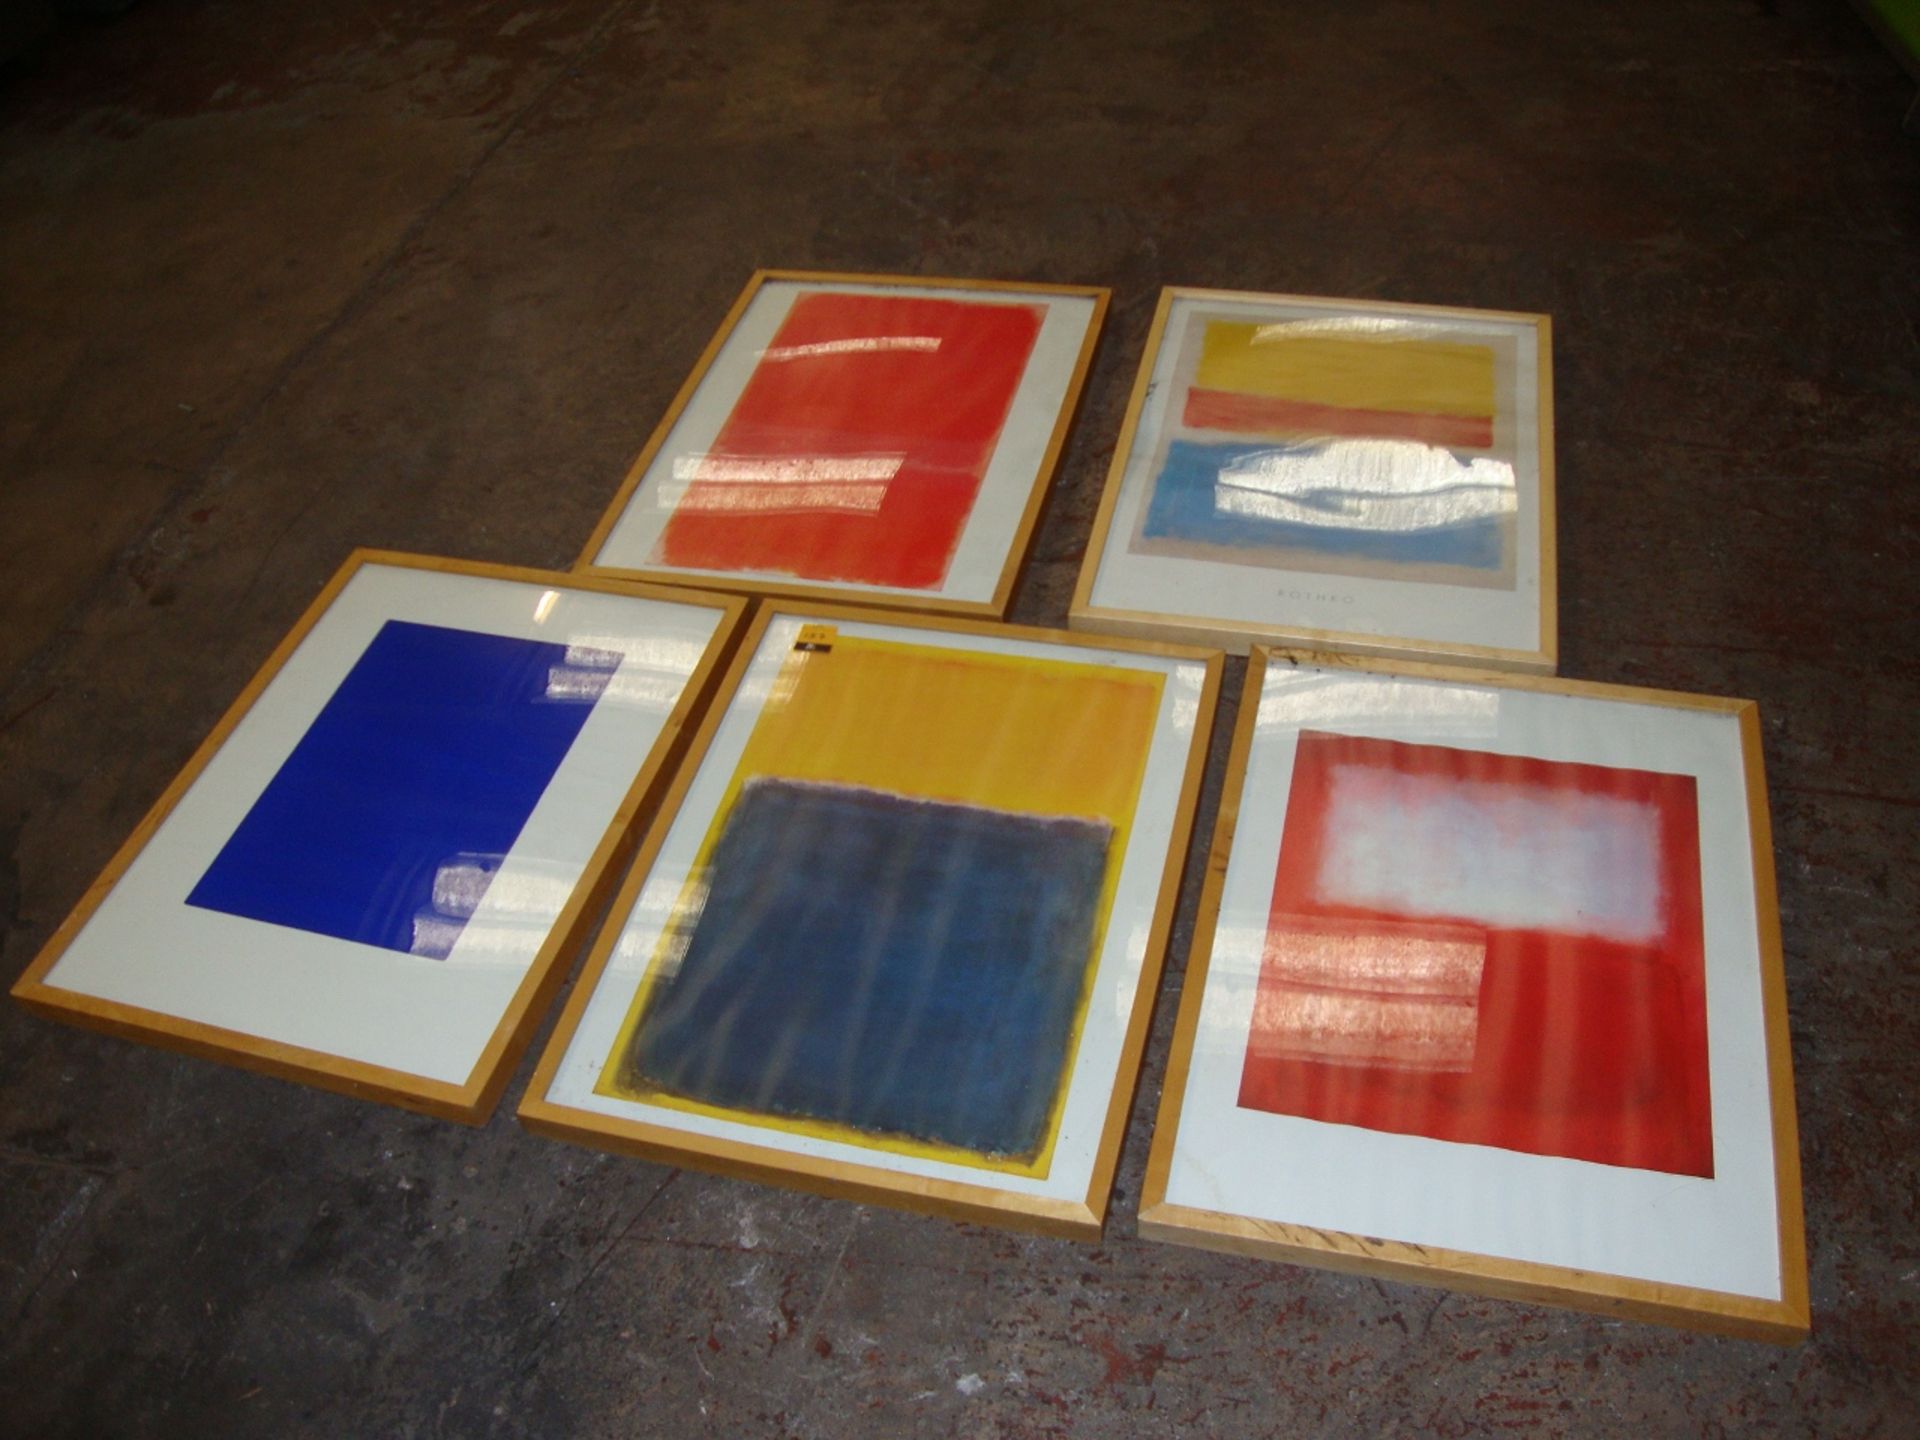 5 off assorted Rothko and Rothko-style pictures each in their own wooden frame, each with overall